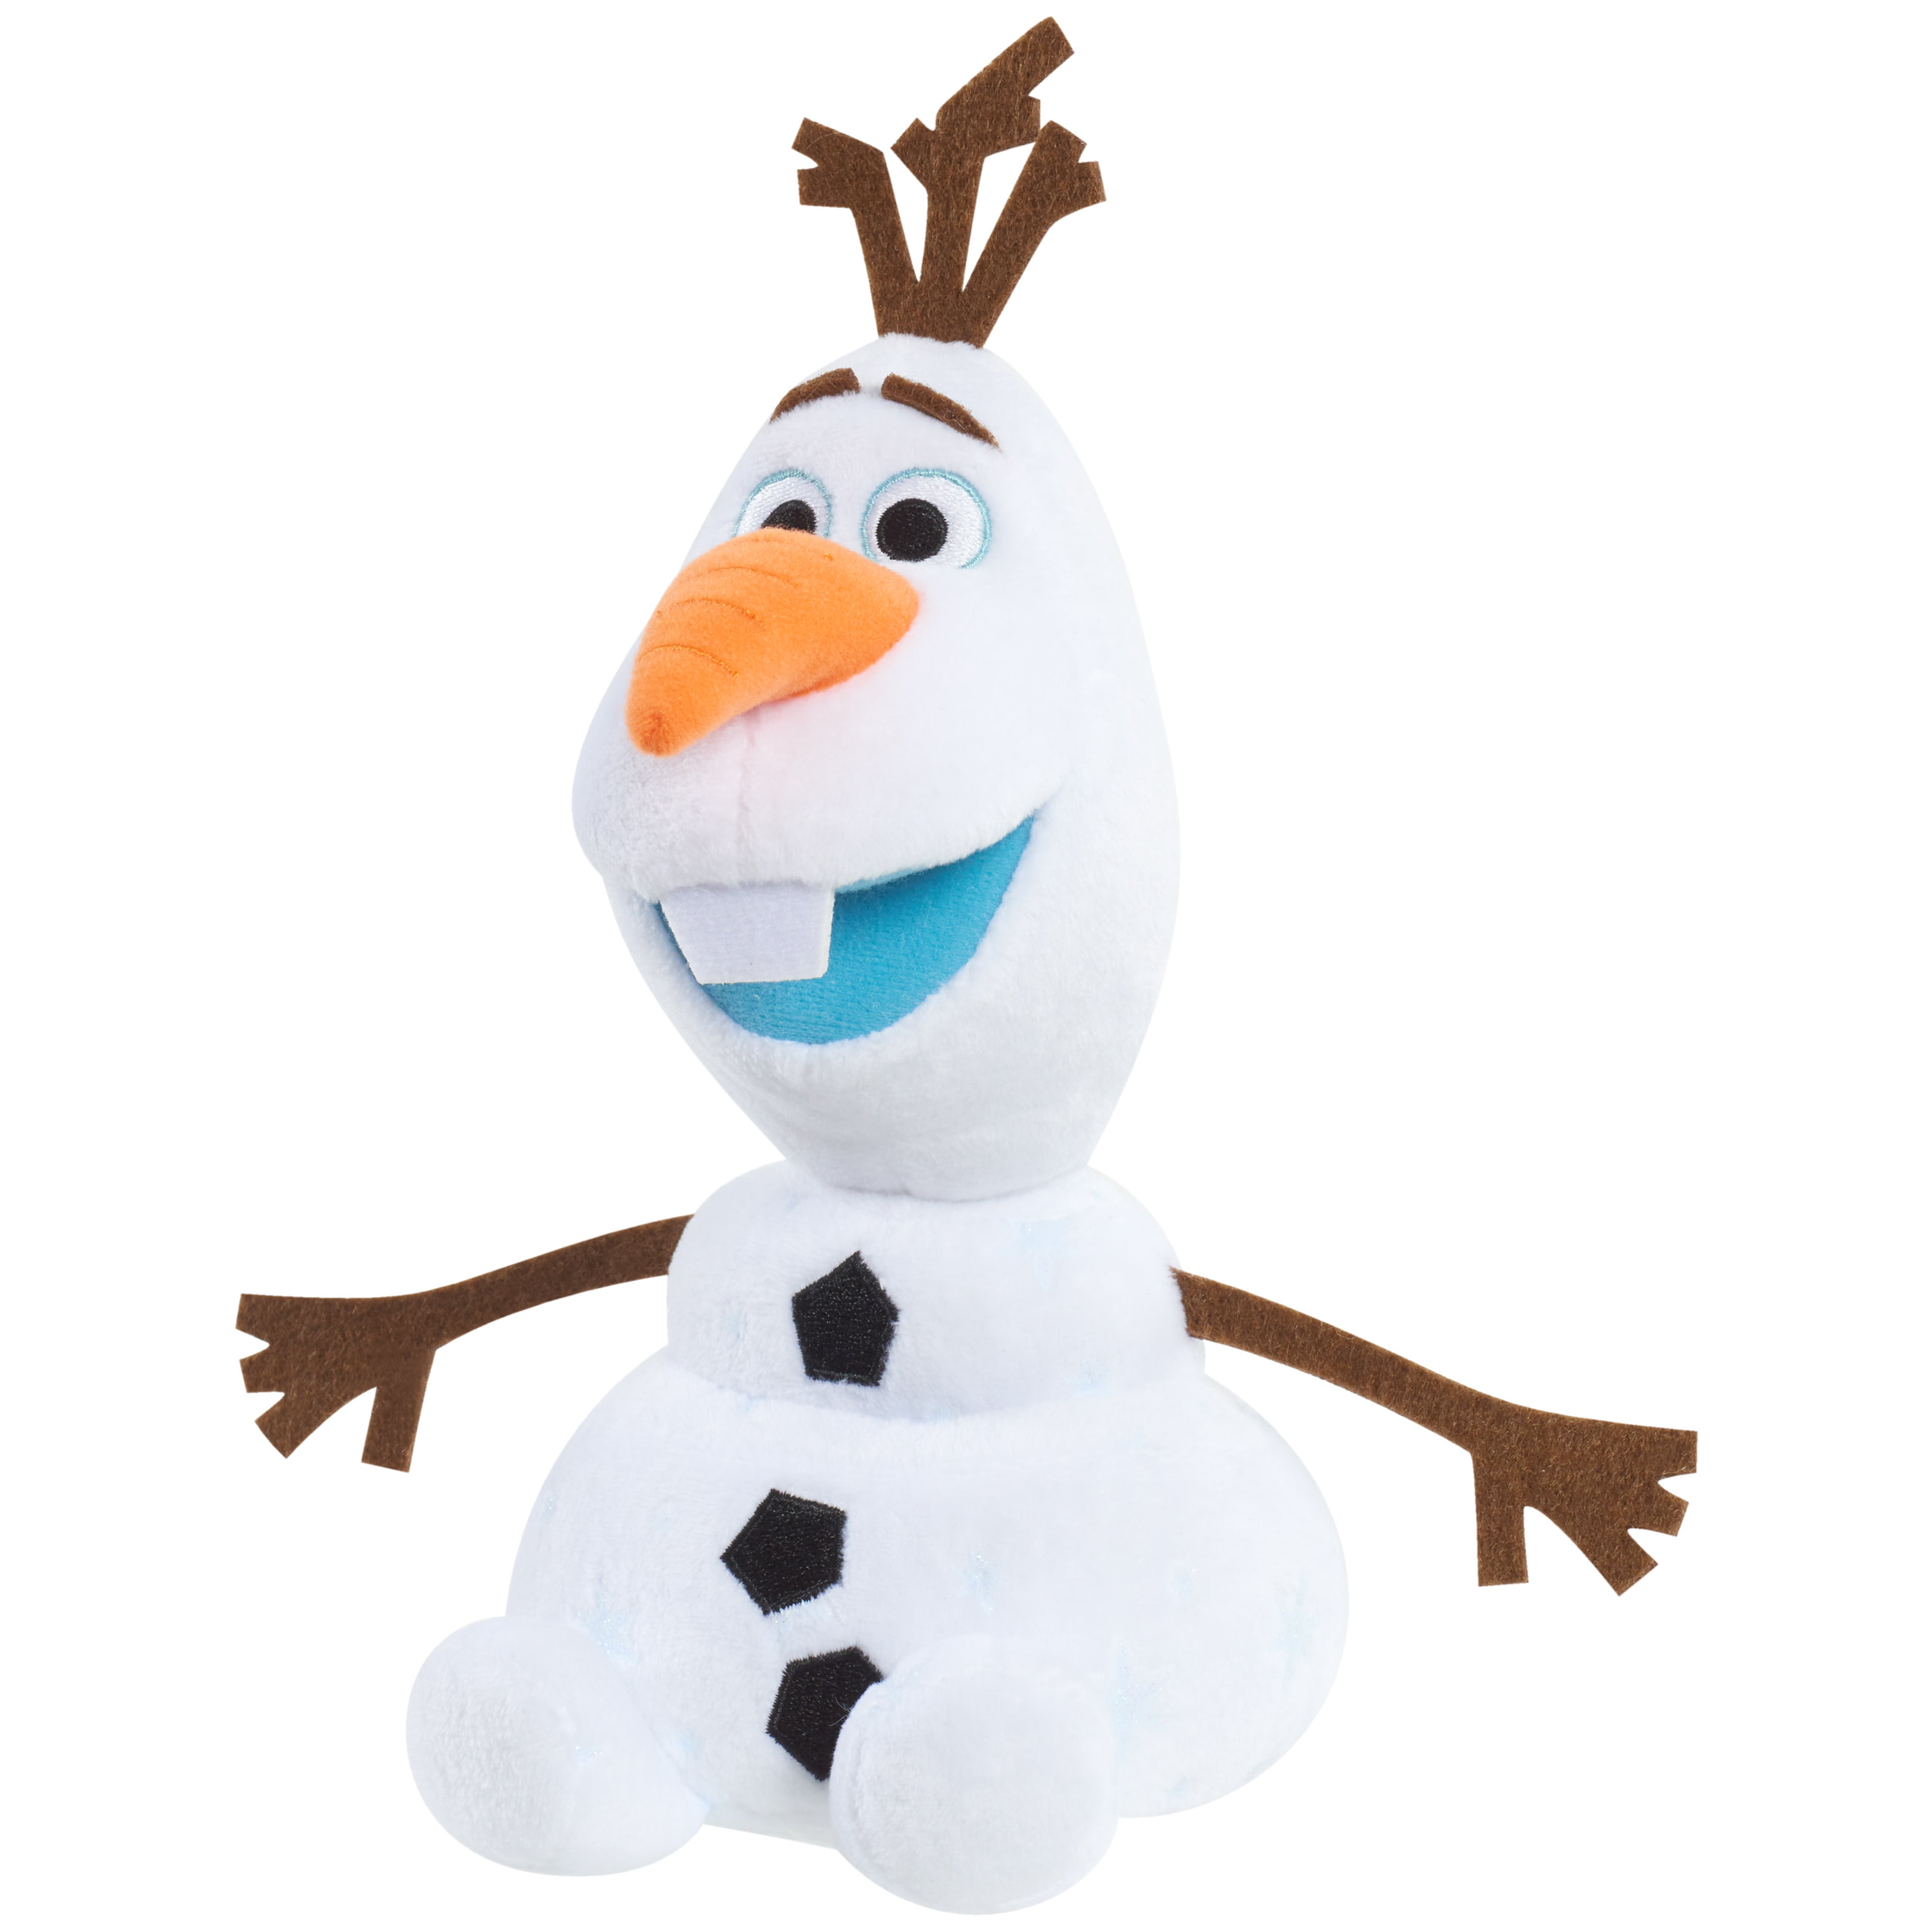 Disney Frozen Excited Olaf 5 inch Plush Toy 